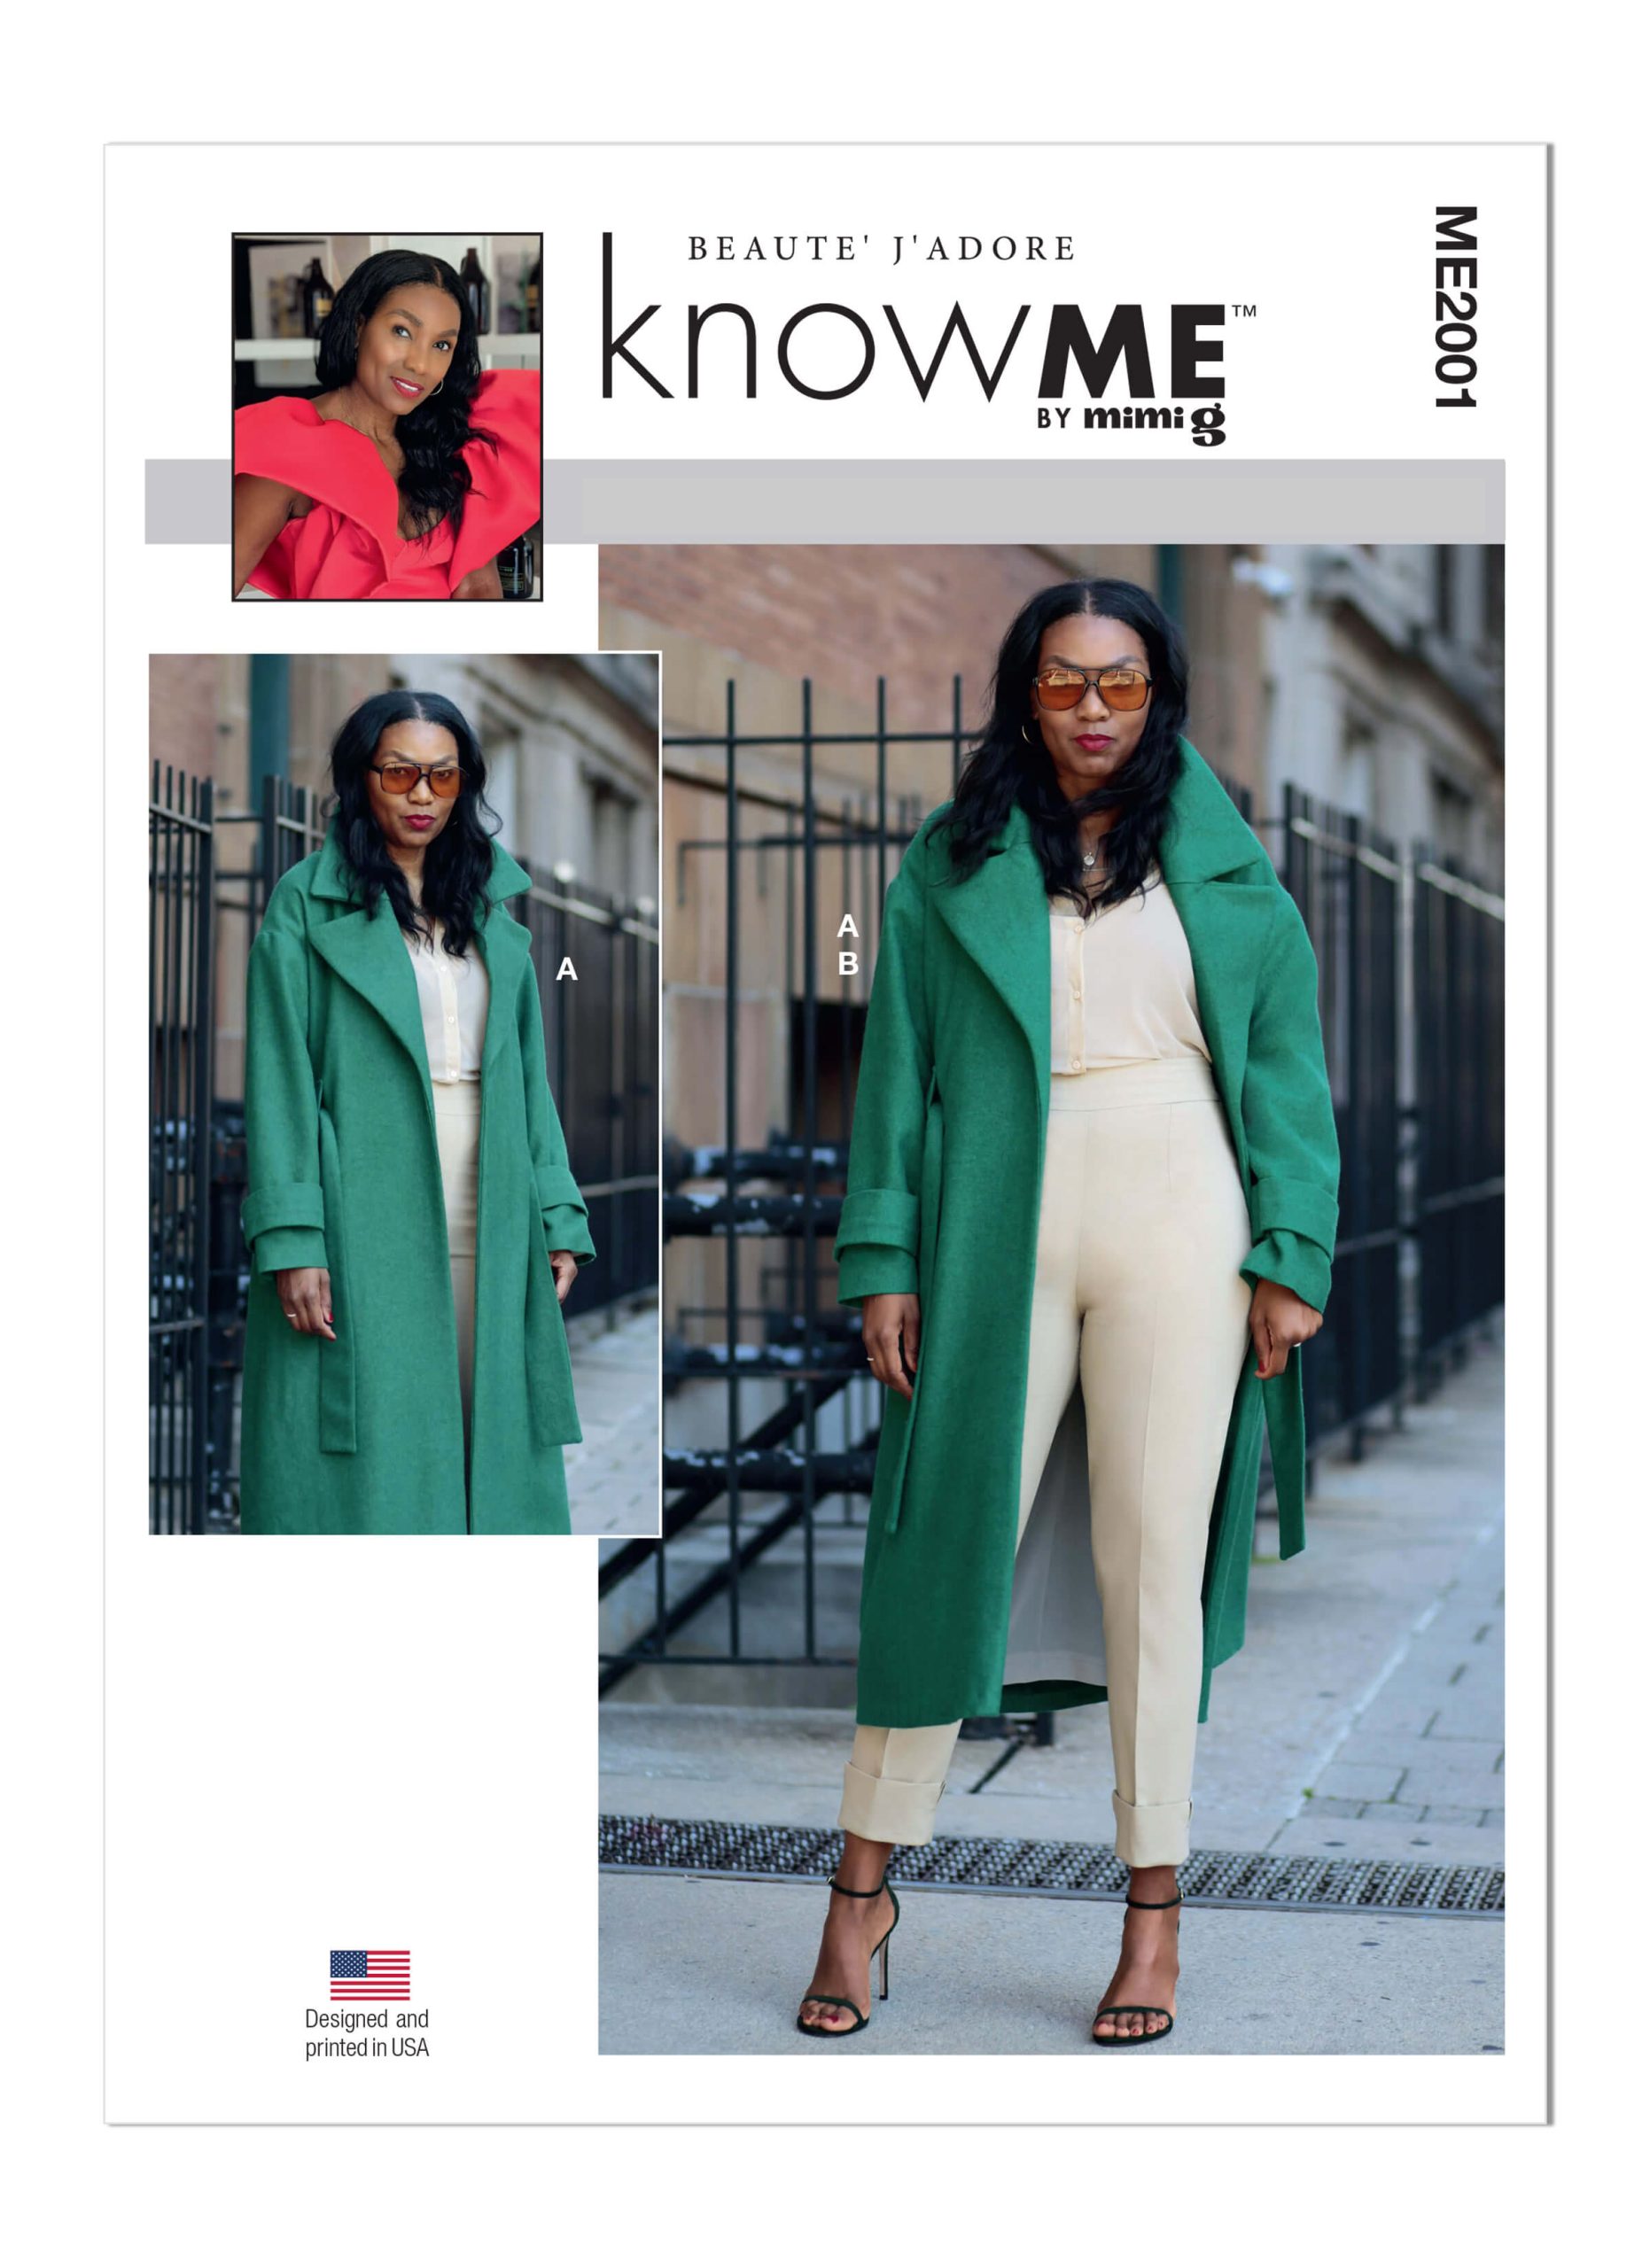 Know Me Sewing Pattern ME2001 Misses' and Women's Coat and Trousers by Beaute' J'adore